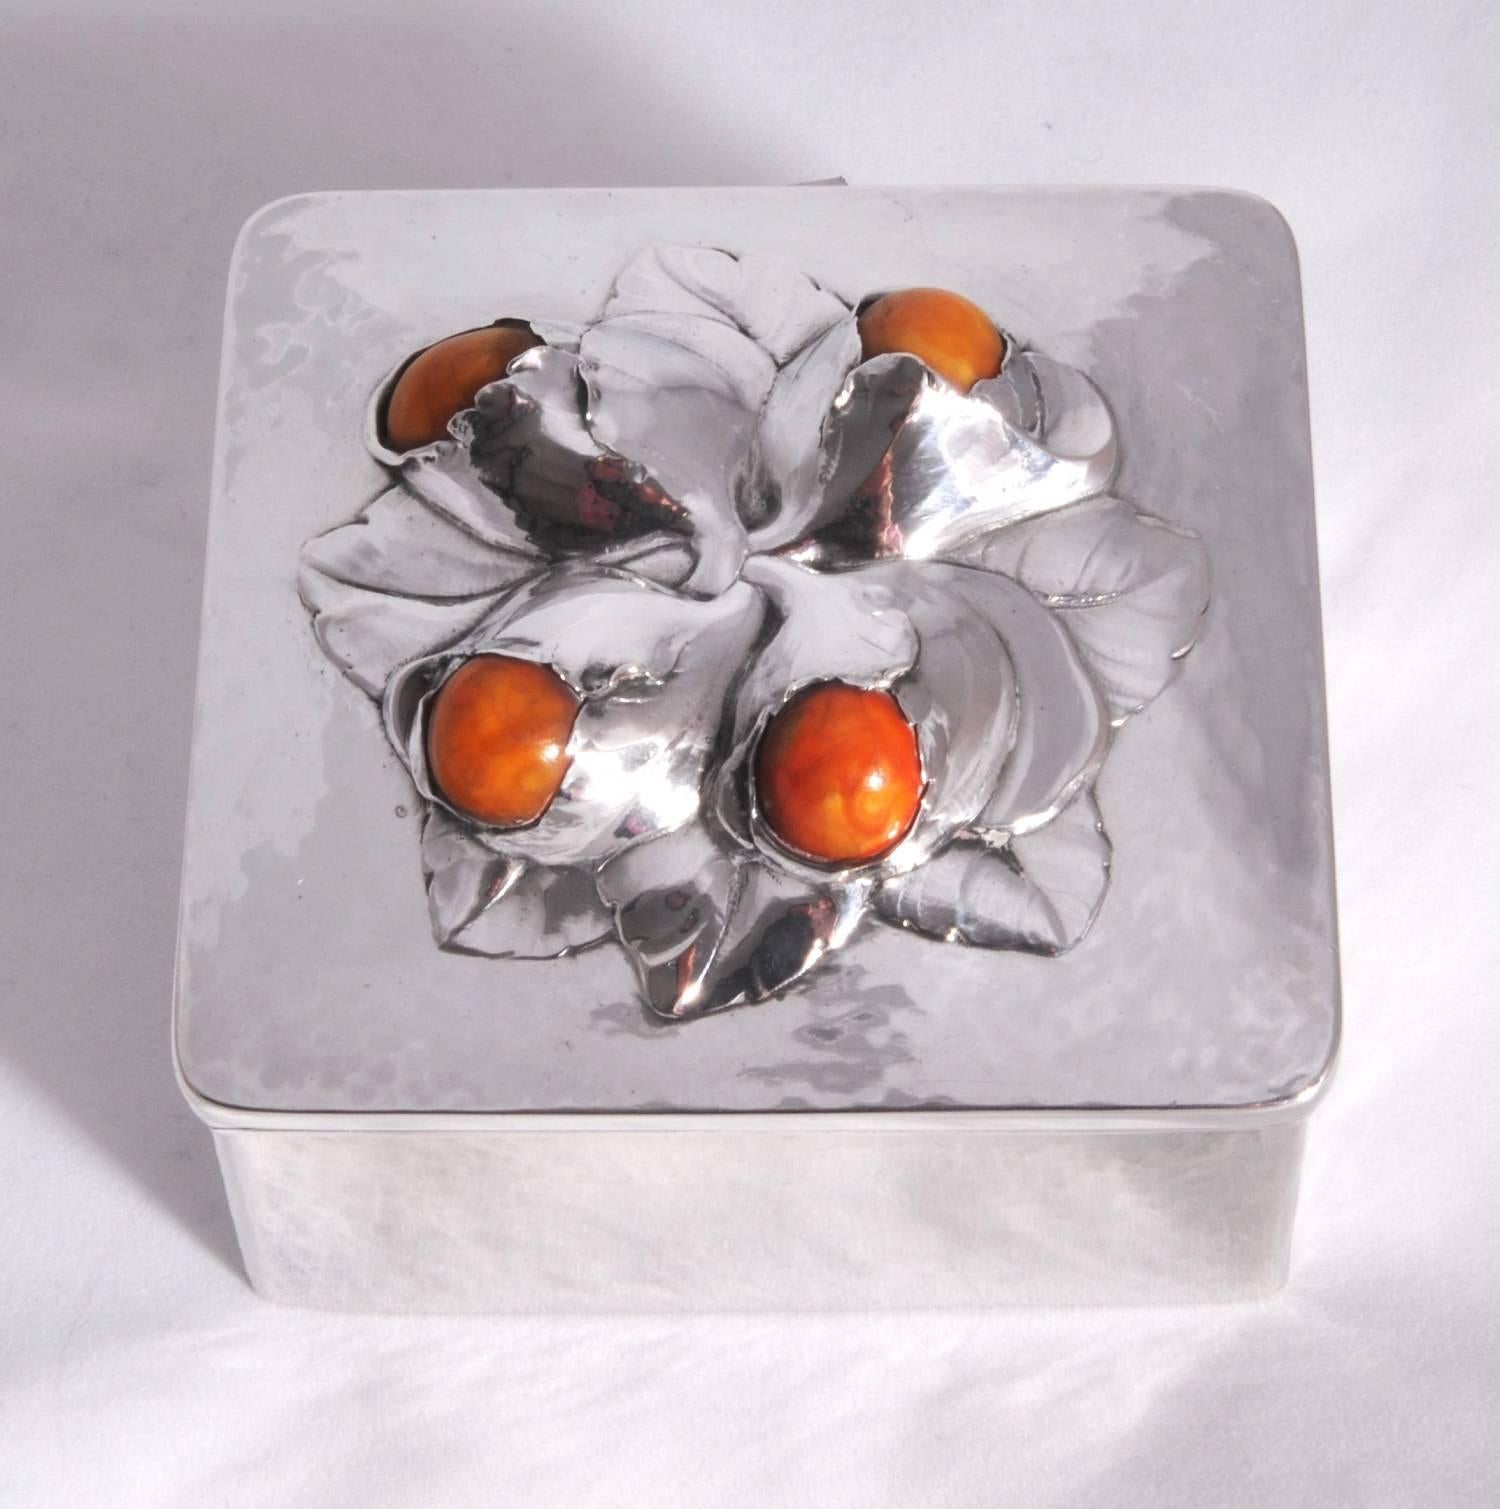 A beautiful Evald Nielsen silver box set with Baltic amber within a budding flower design. The piece is hallmarked for Denmark, Copenhagen, 1914 with the EN makers mark and Evald Nielsen signature. The design is typical of Nielsen's work which is